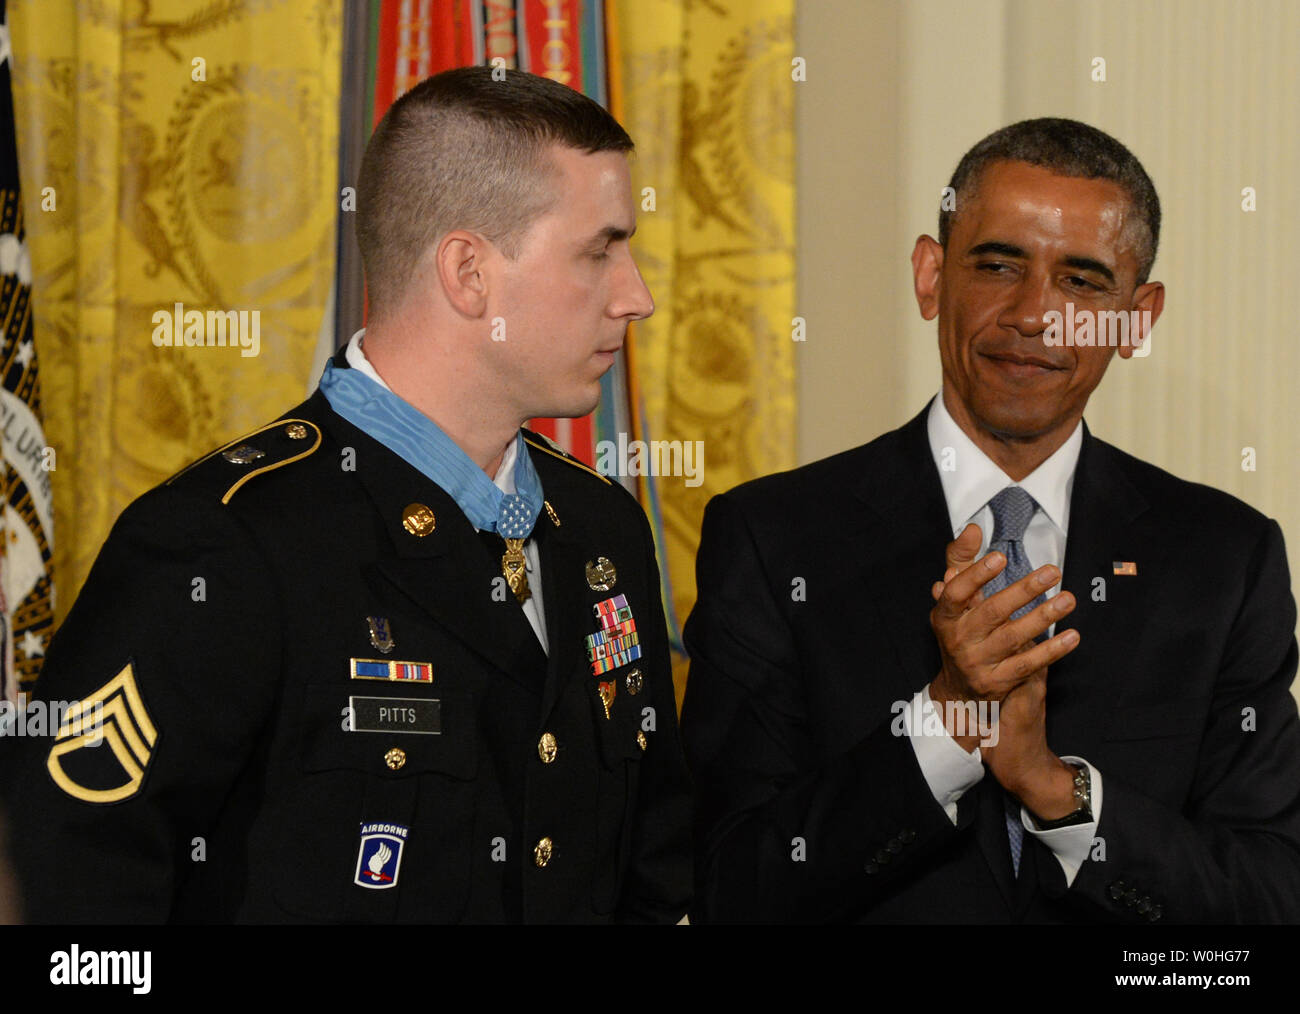 U.S. President Barack Obama applauds after presenting the Medal of Honor to former Army Staff Sergeant Ryan Pitts during a ceremony in the East Room of the White House on July 21, 2014.  Pitts, from the 2nd Platoon, Chosen Company, 2nd Battalion (Airborne), 503rd Infantry Regiment, 173rd Airborne Brigade, was awarded the Nation's highest military honor for his courageous actions during combat operations at Vehicle Patrol Base Kahler in Kunar Province, Afghanistan on July 13, 2008.       UPI/Pat Benic Stock Photo